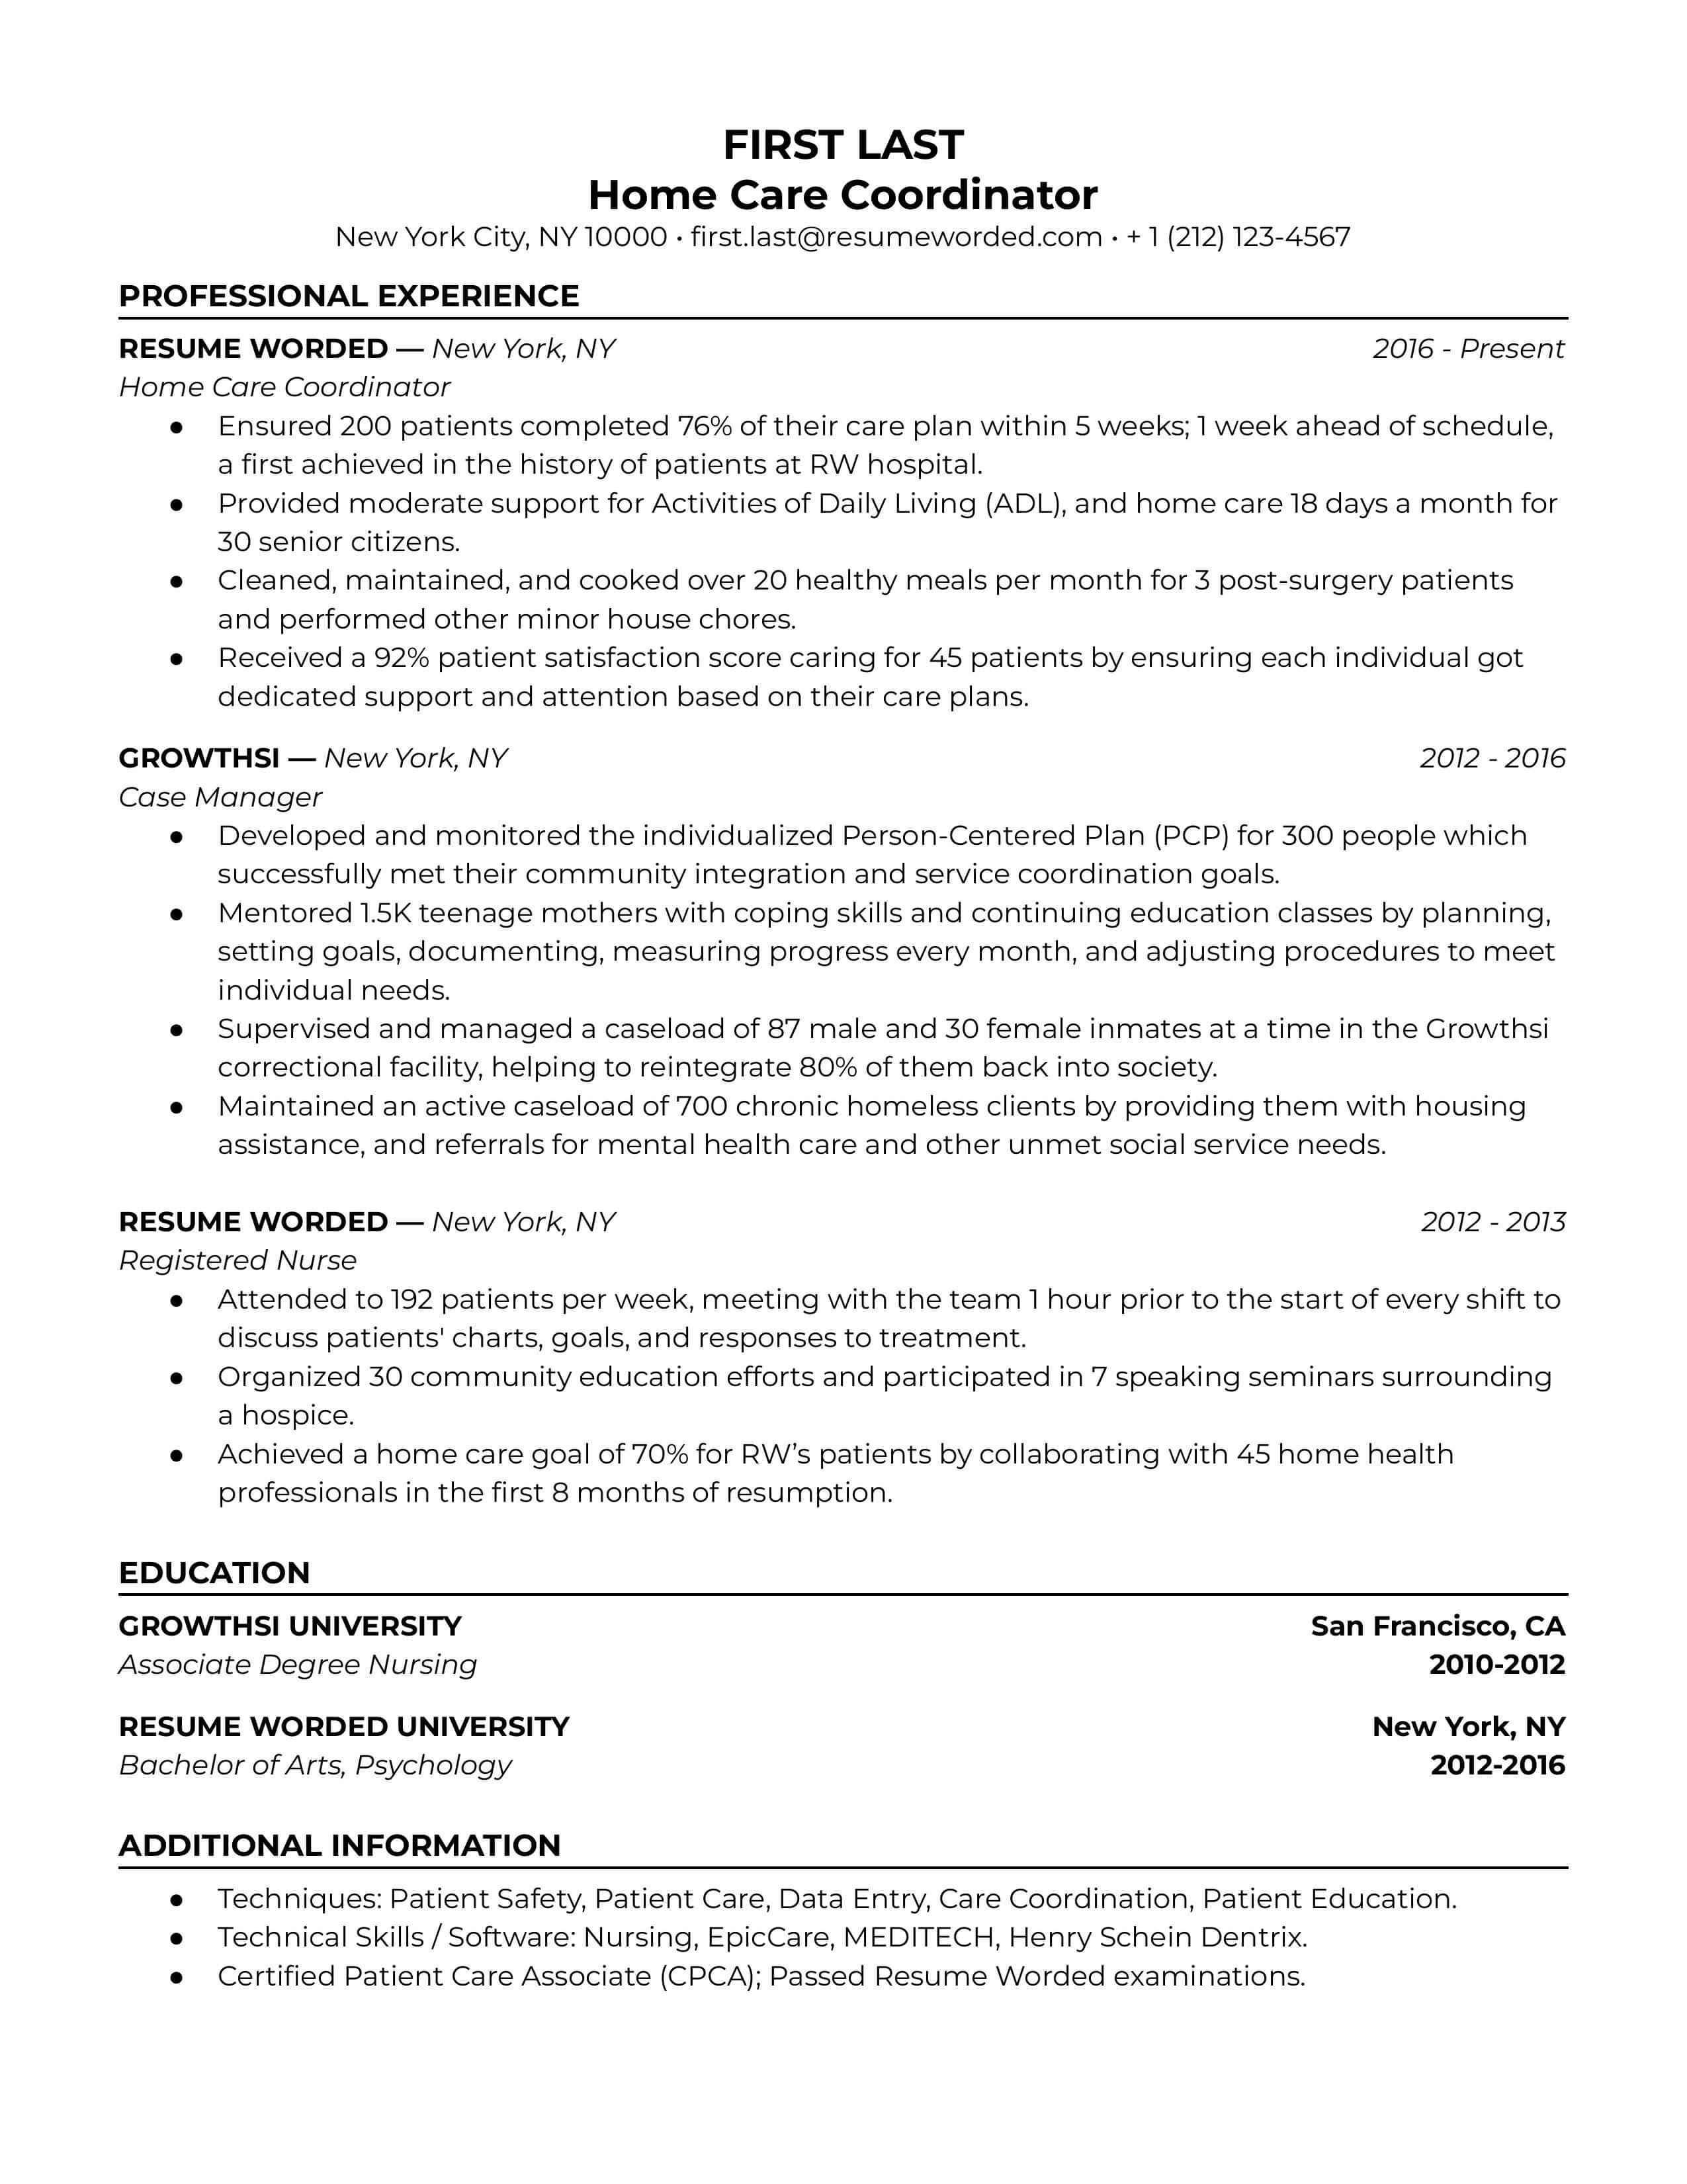 A home care coordinator resume sample that highlights the applicant's certifications and licenses, as well as their workload capabilities.